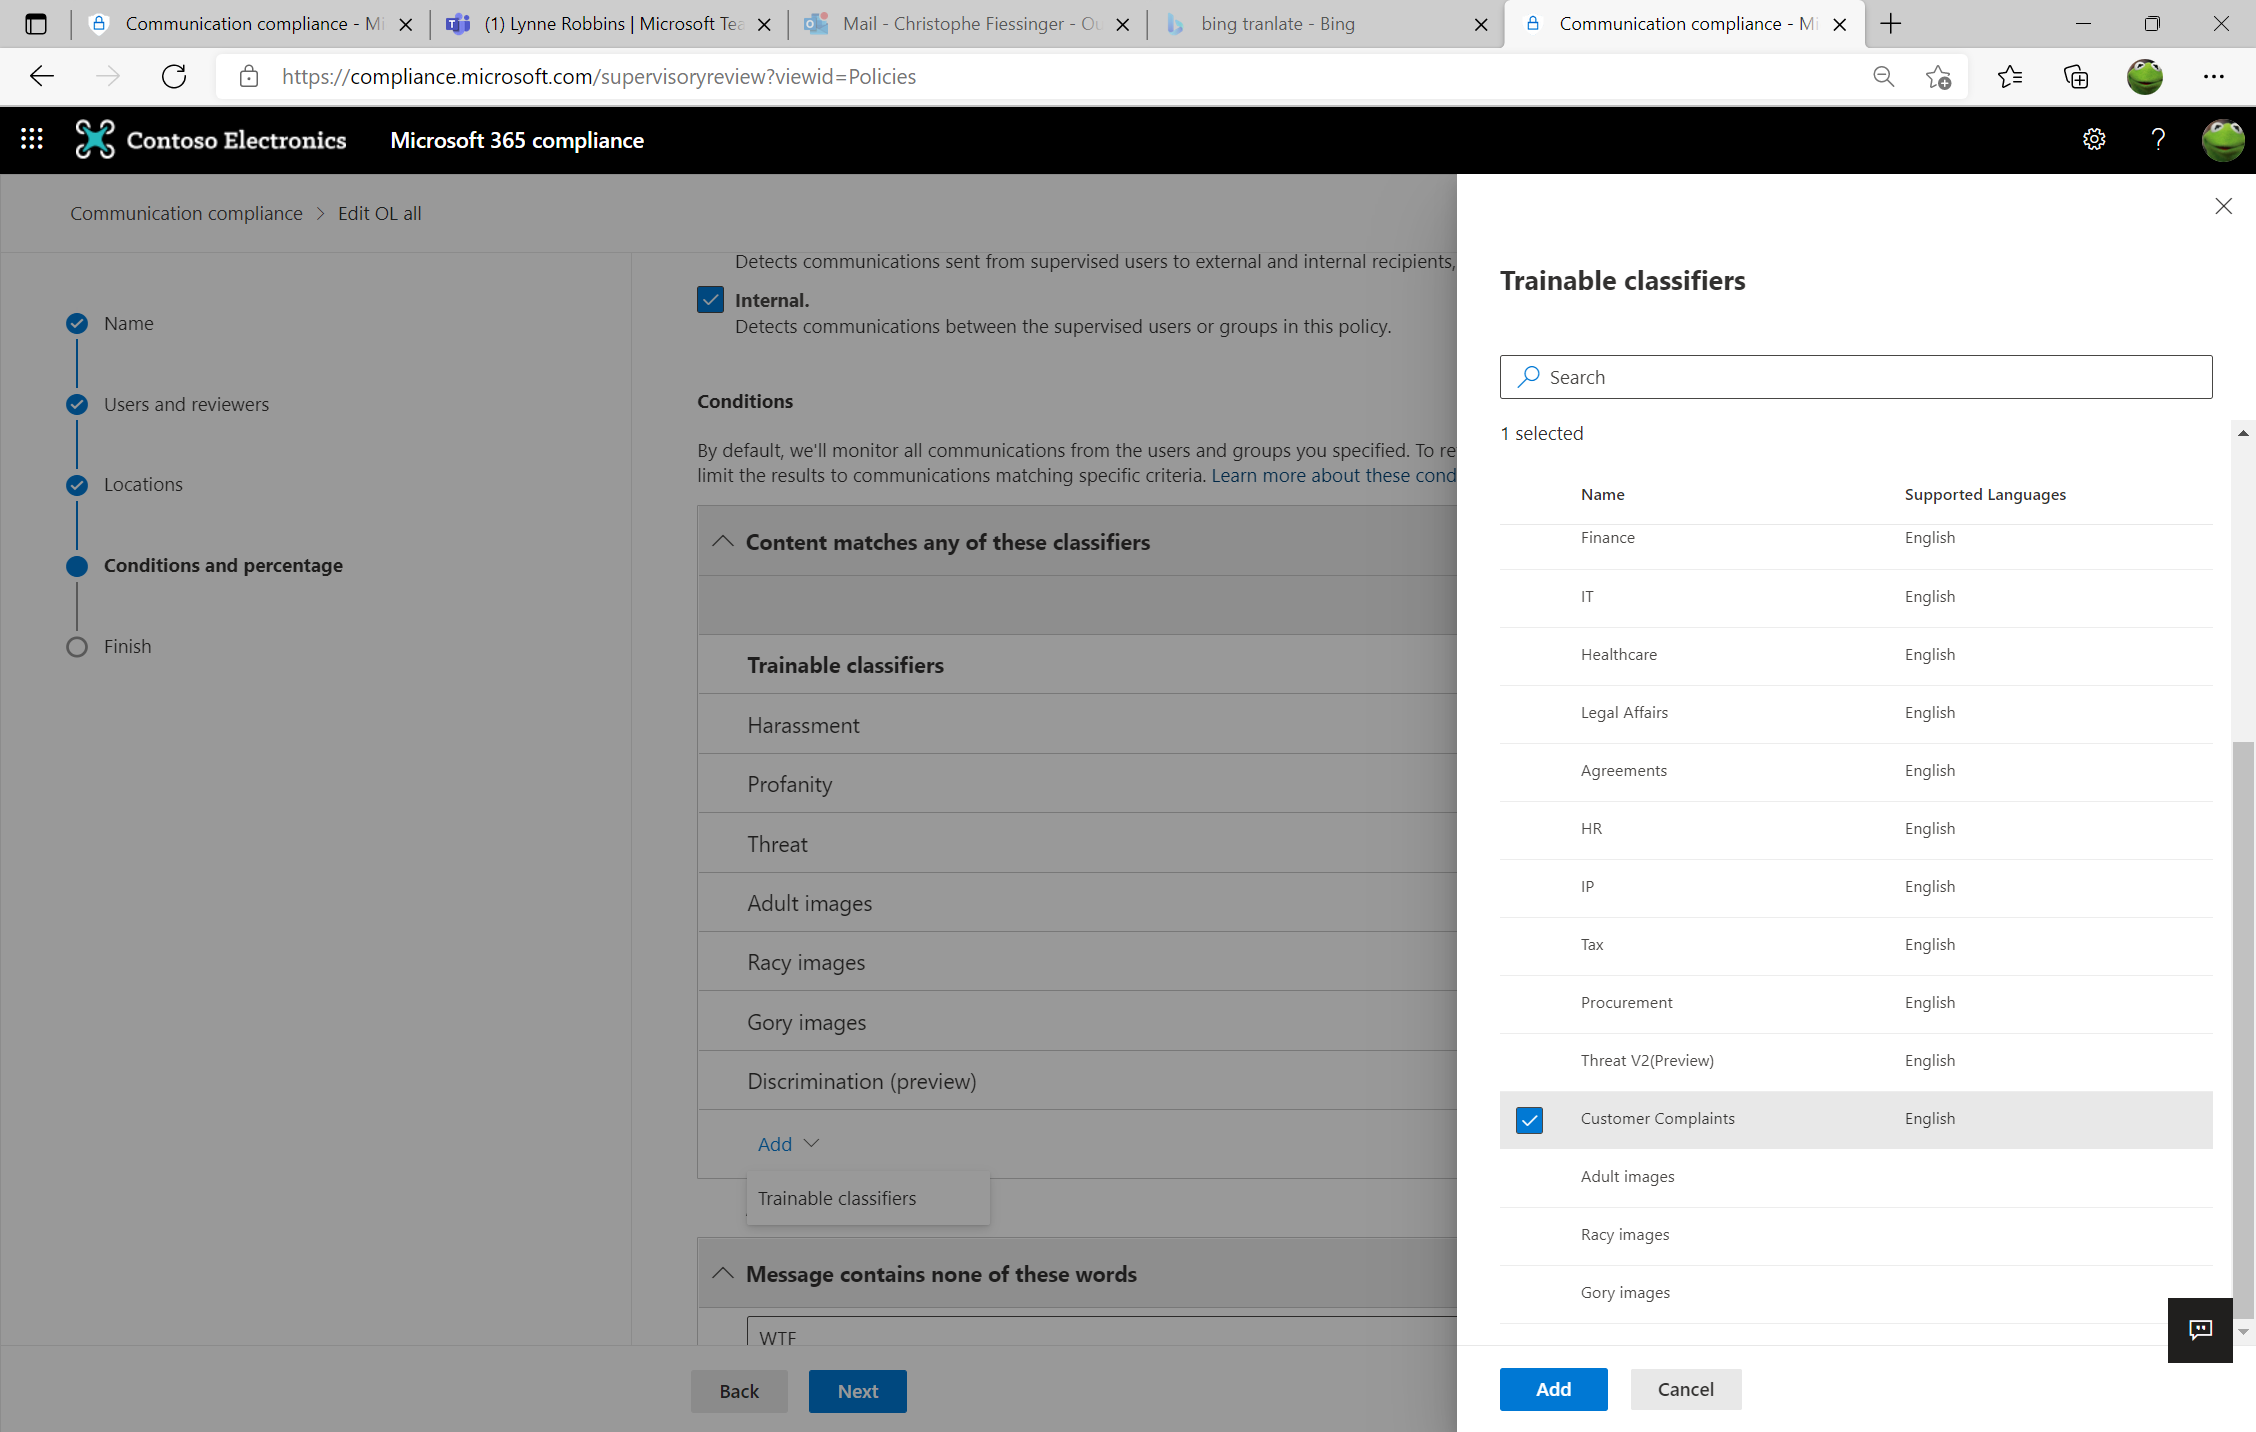 You can select this classifier as a condition for matching content in Microsoft Teams chat or emails, for instance, in both new and existing Communication Compliance policies.